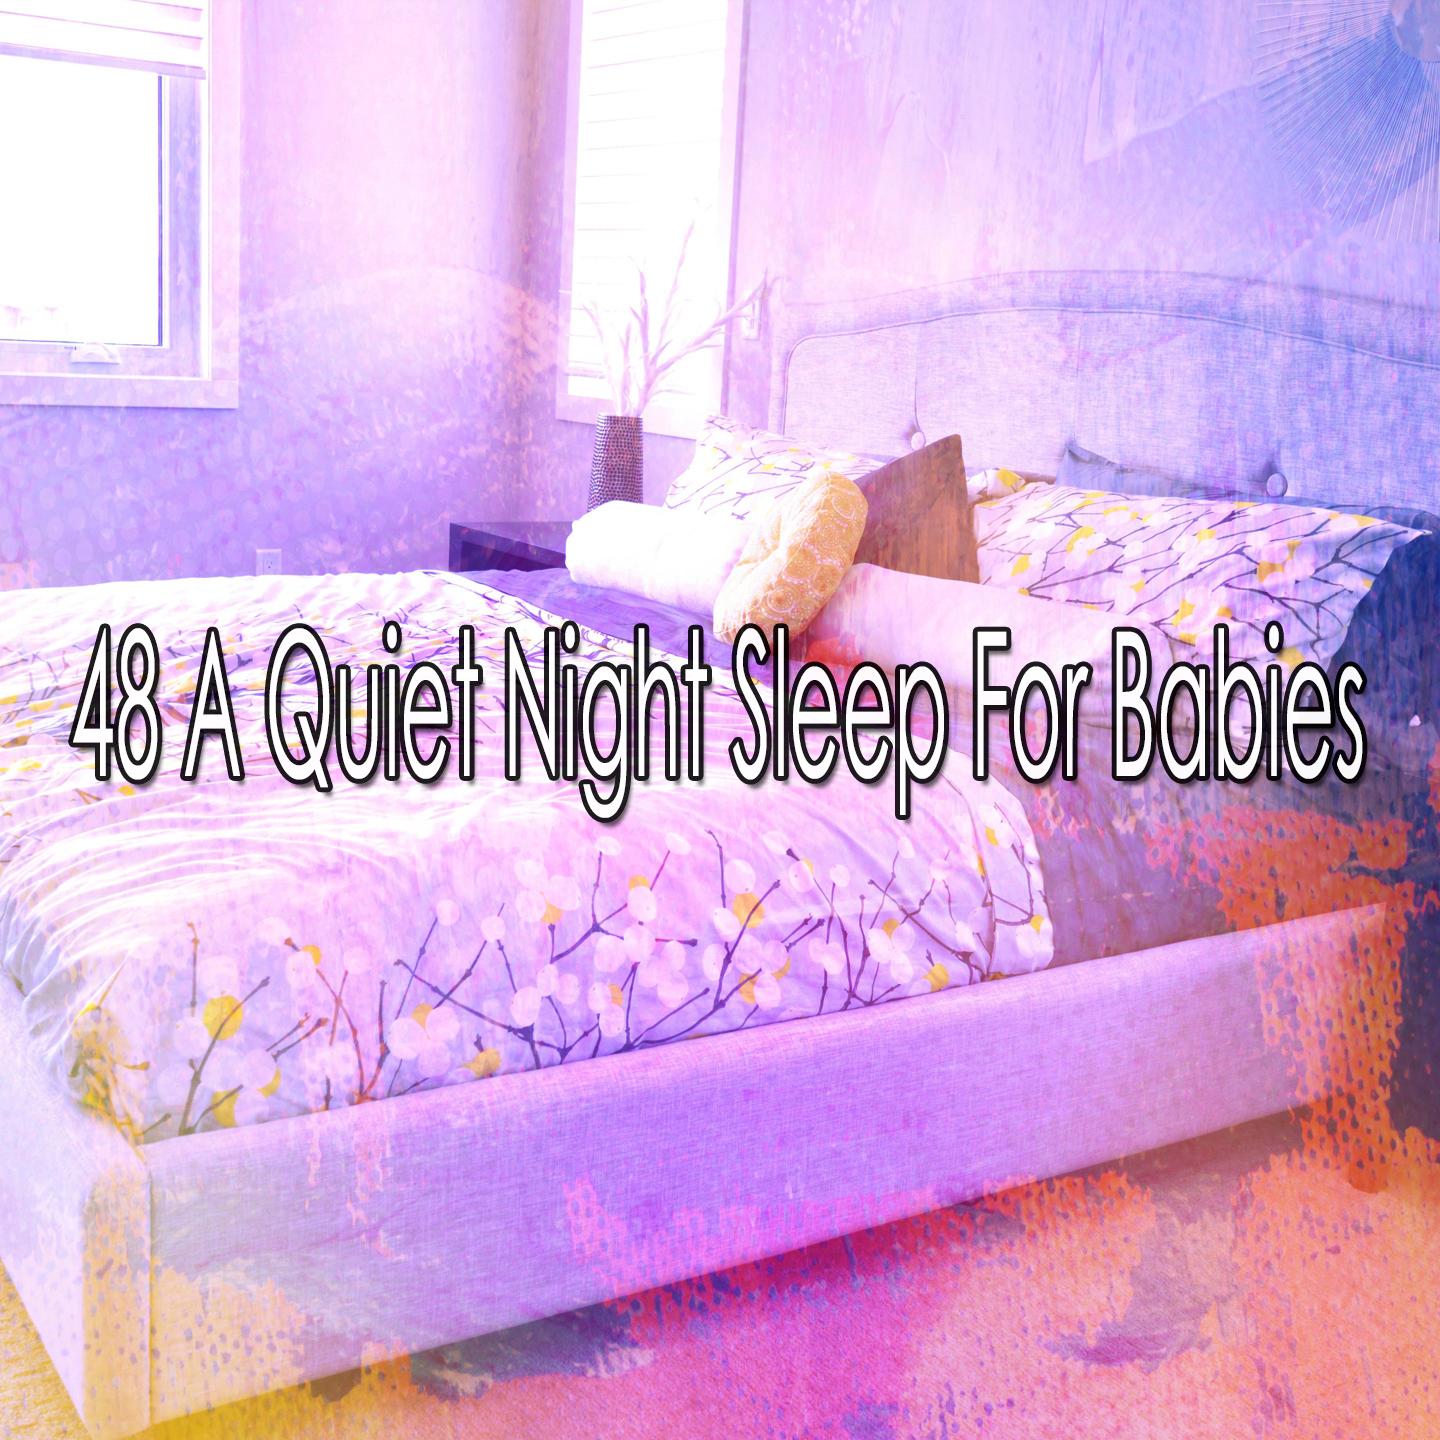 48 A Quiet Night Sleep for Babies